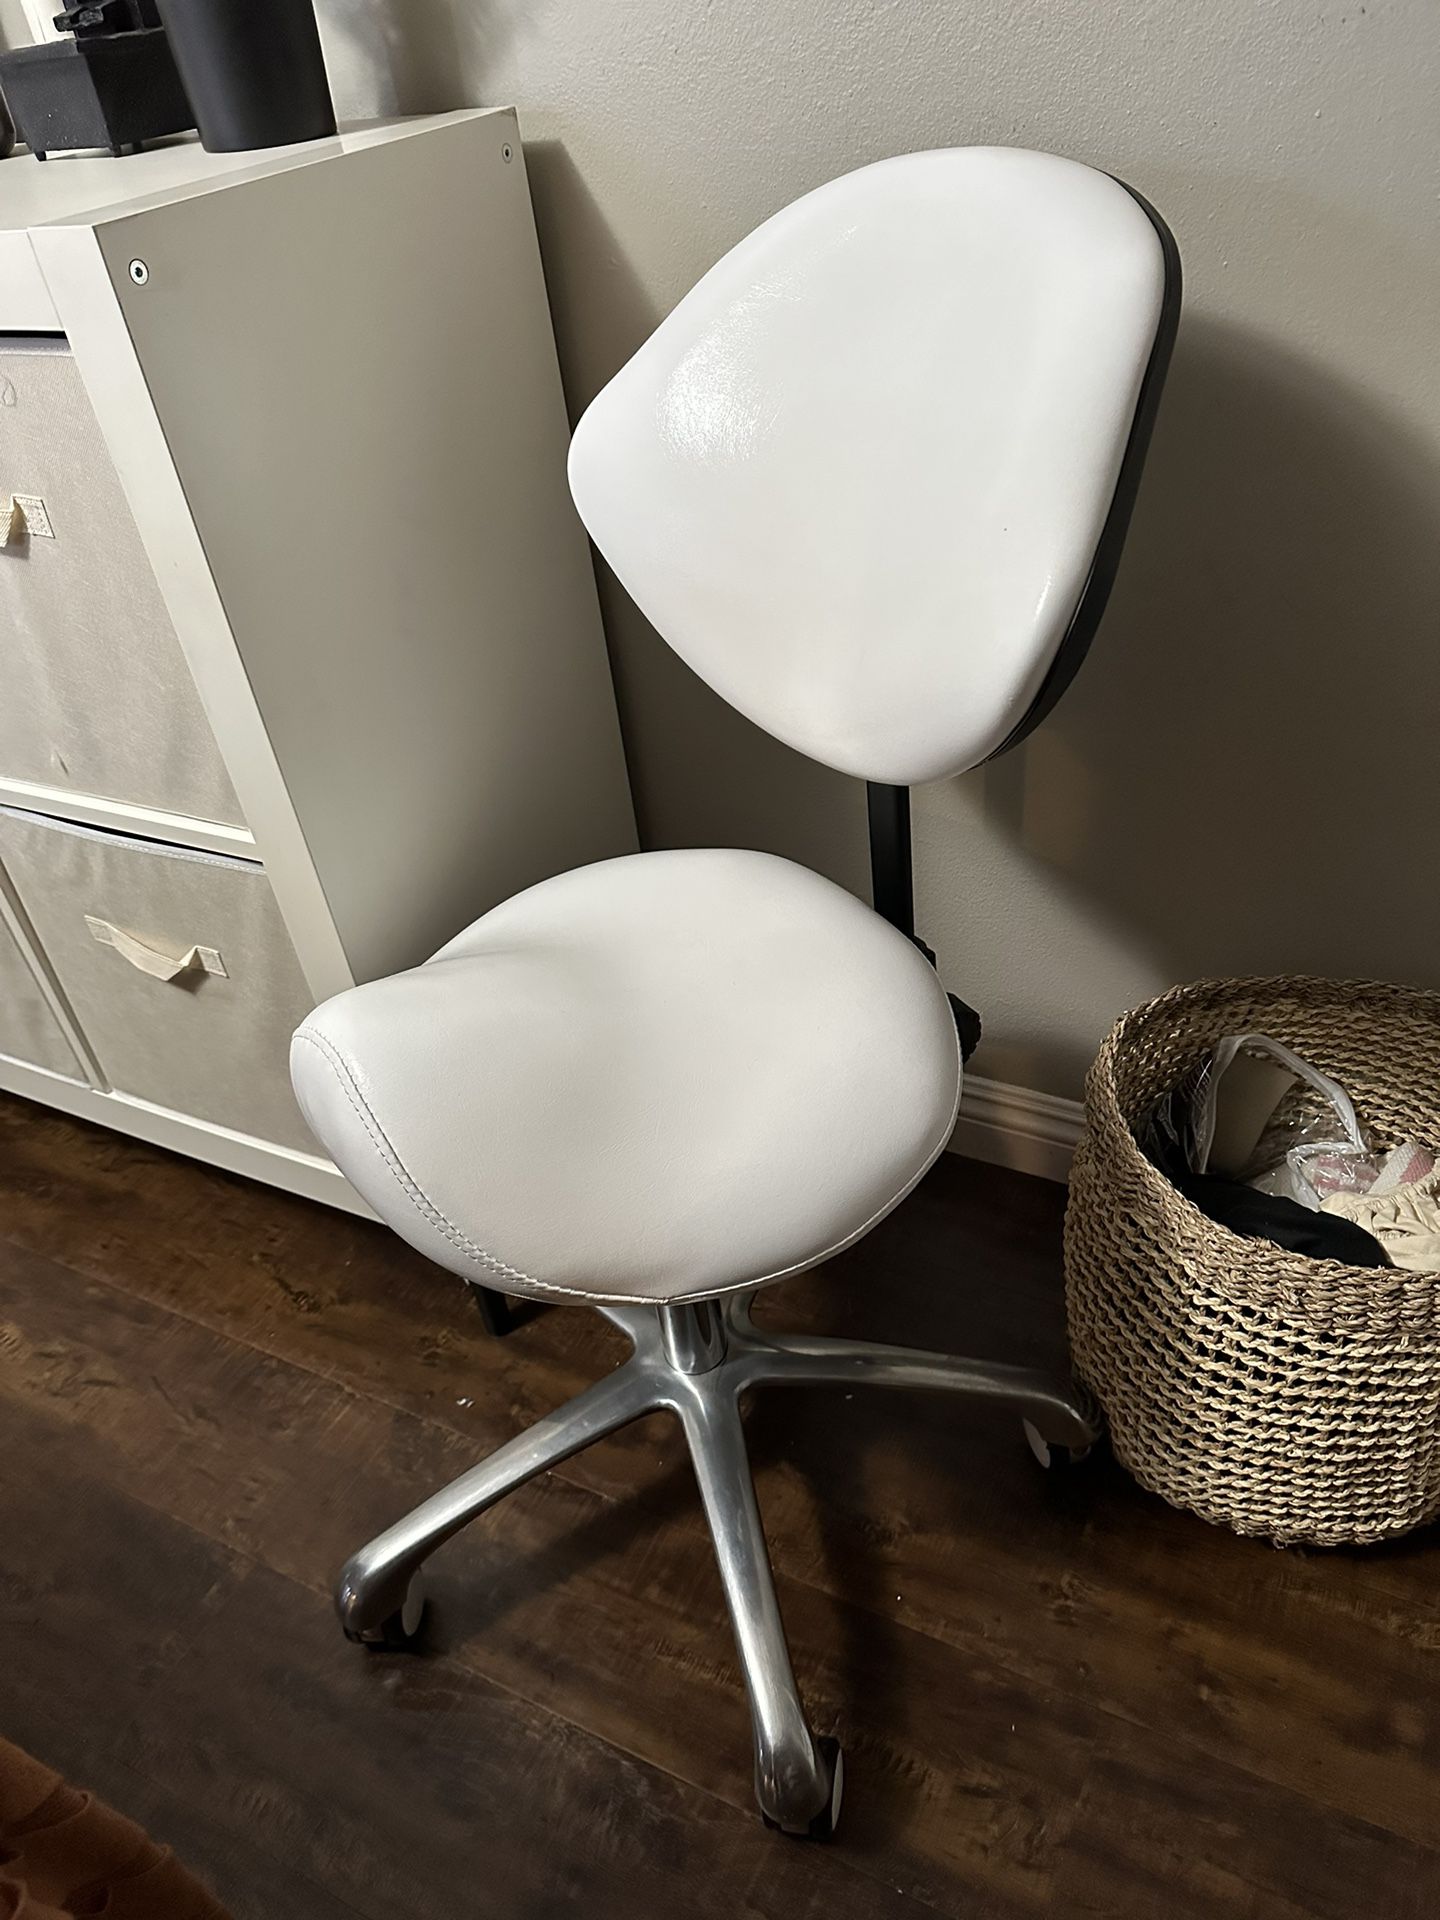 Esthetician Saddle Stool Chair With Back Support